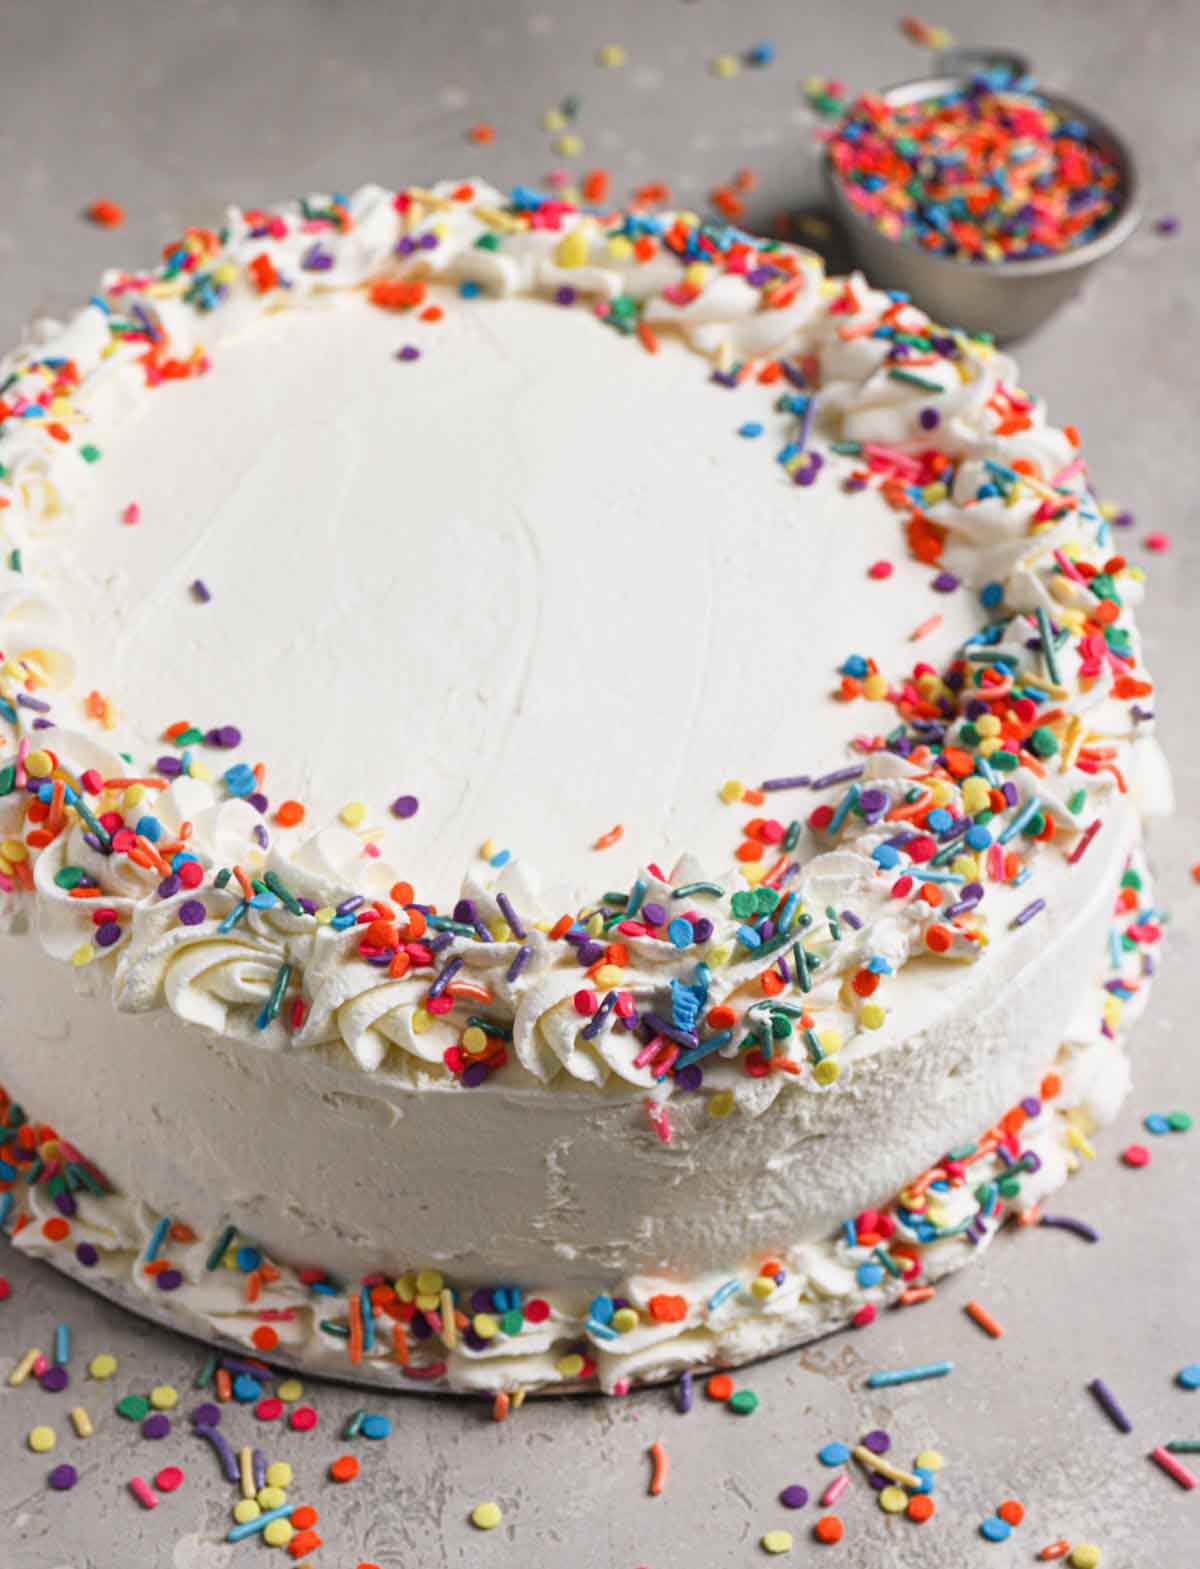 Assembled homemade ice cream cake frosted in whipped cream and decorated with rainbow sprinkles.